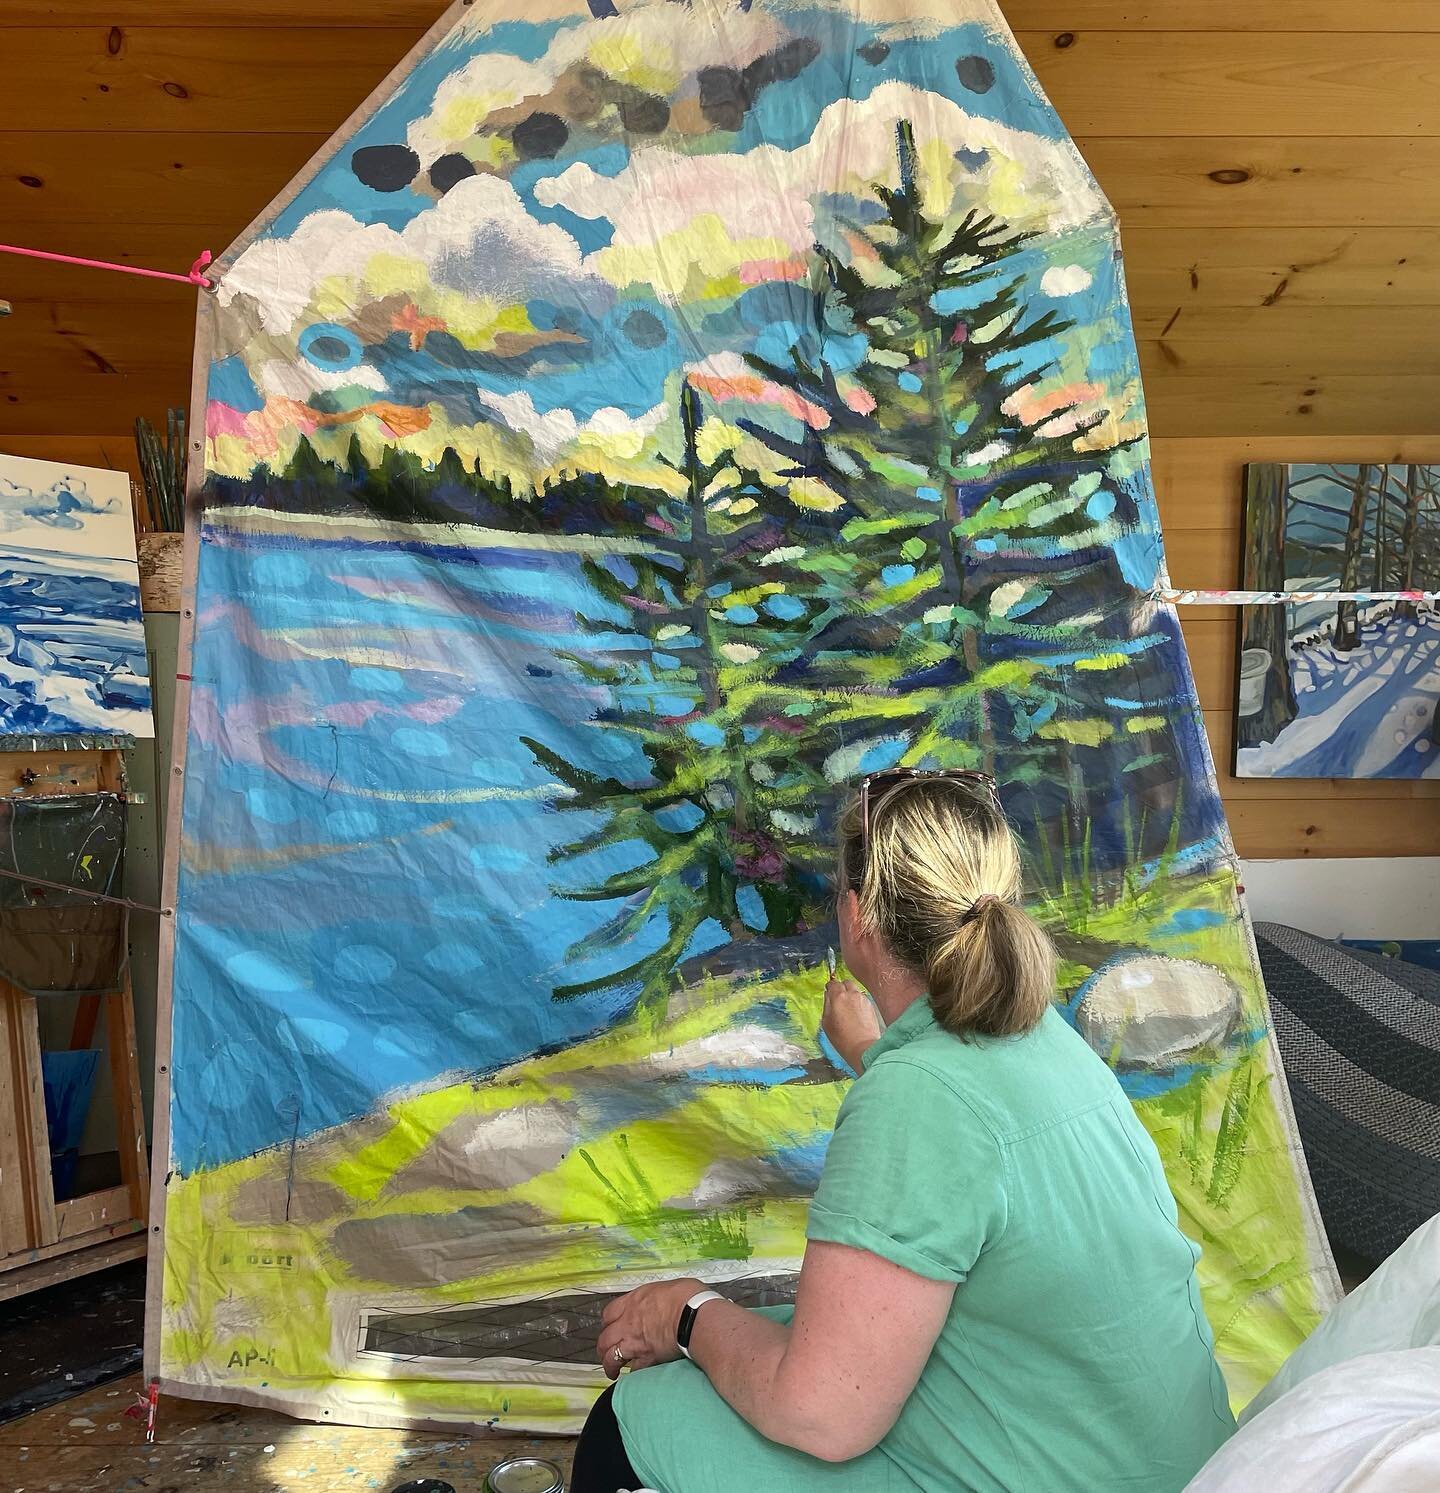 A break in the humidity gave me time to work on painting a sail for @sail_maine Festival and Regatta .. 

Looking forward to seeing the painted sails out on Casco Bay August 12
.
.

#Maine #Maineartist #mainelife #maineart #mainepaintings #Maineart #